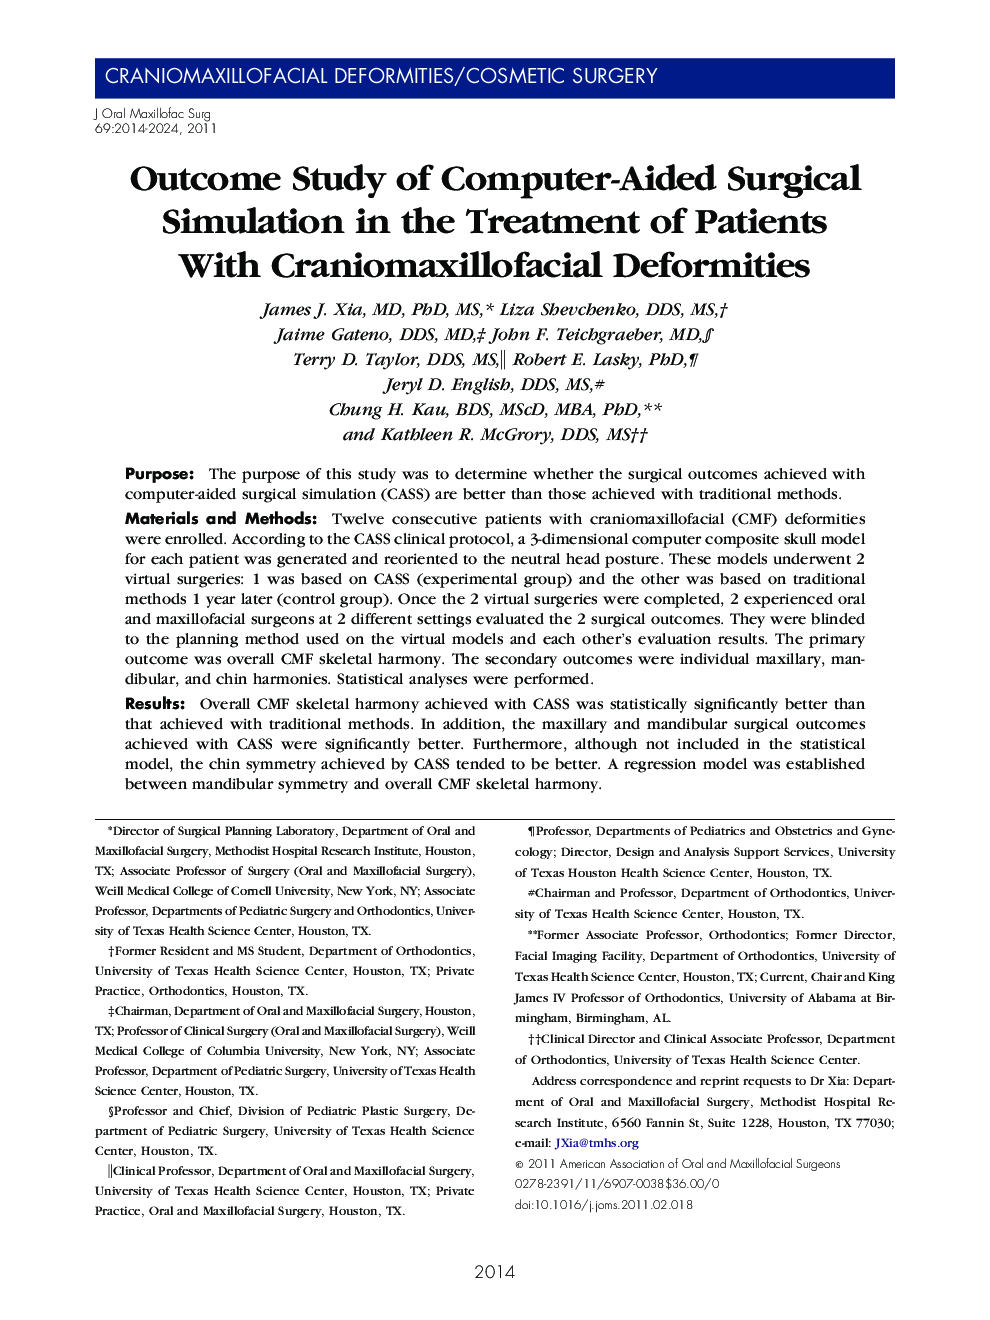 Outcome Study of Computer-Aided Surgical Simulation in the Treatment of Patients With Craniomaxillofacial Deformities